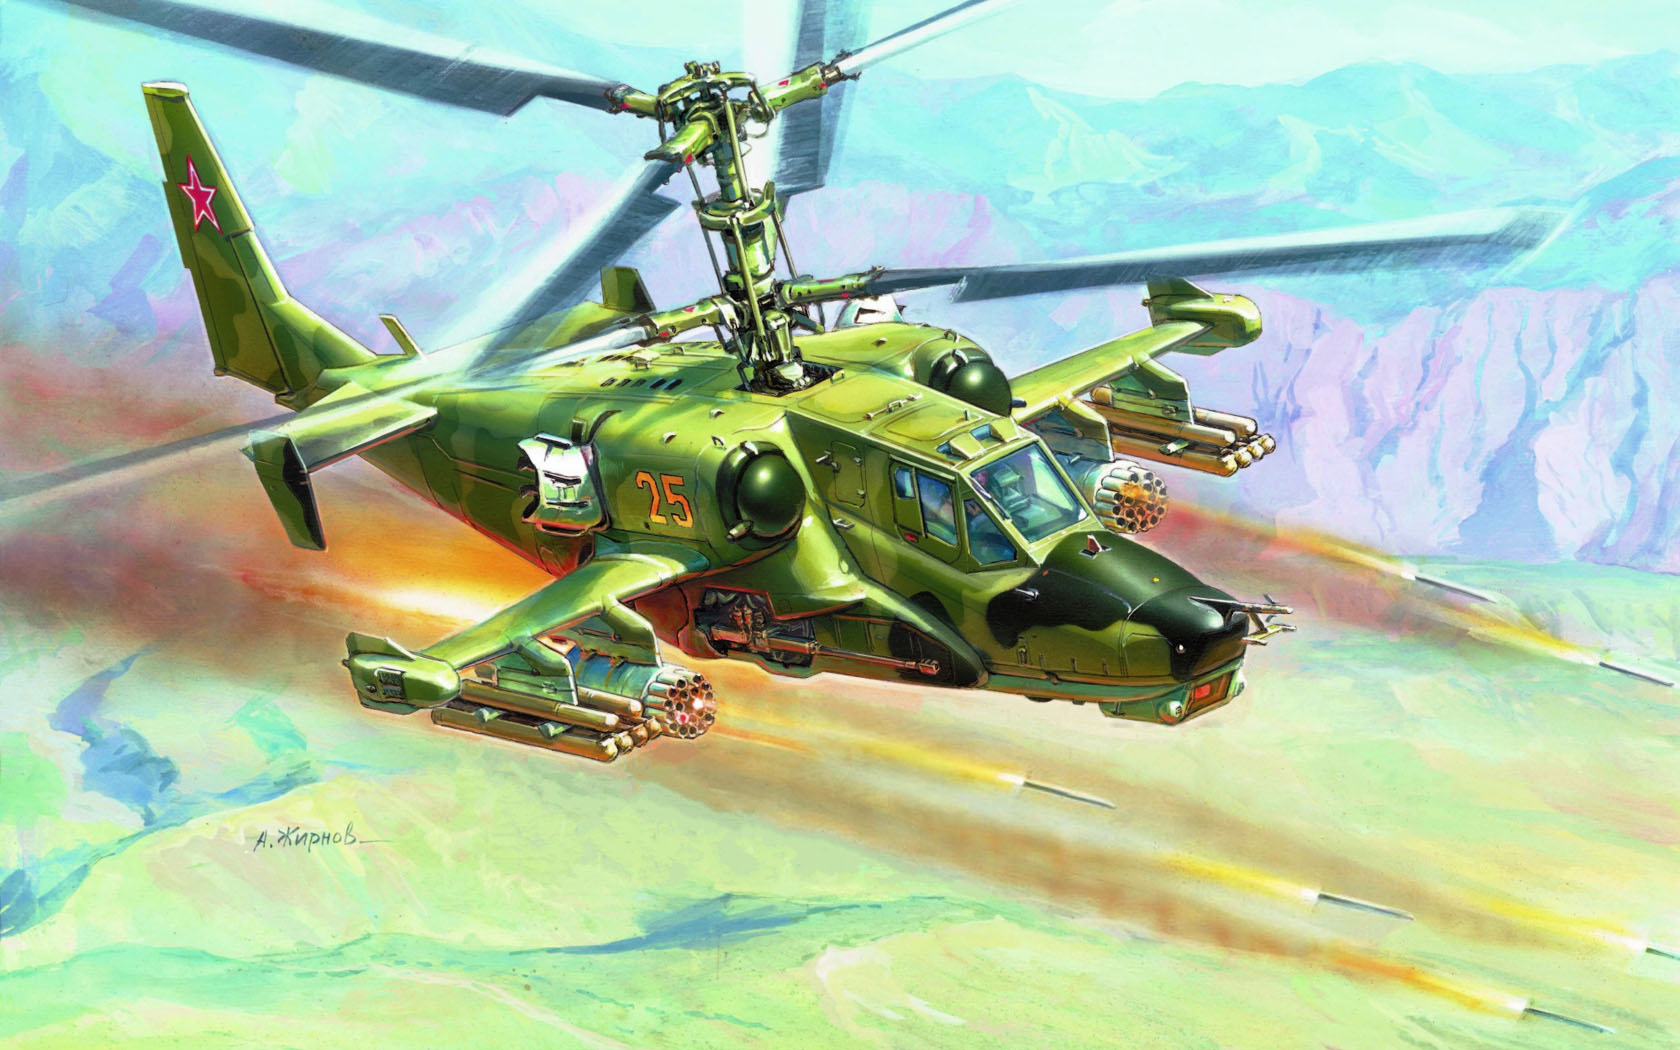 General 1680x1050 aircraft army military flying military vehicle artwork sky signature missiles Kamov ka-50 attack helicopters Andrei Zhirnov Boxart Kamov (Company) Russian/Soviet aircraft